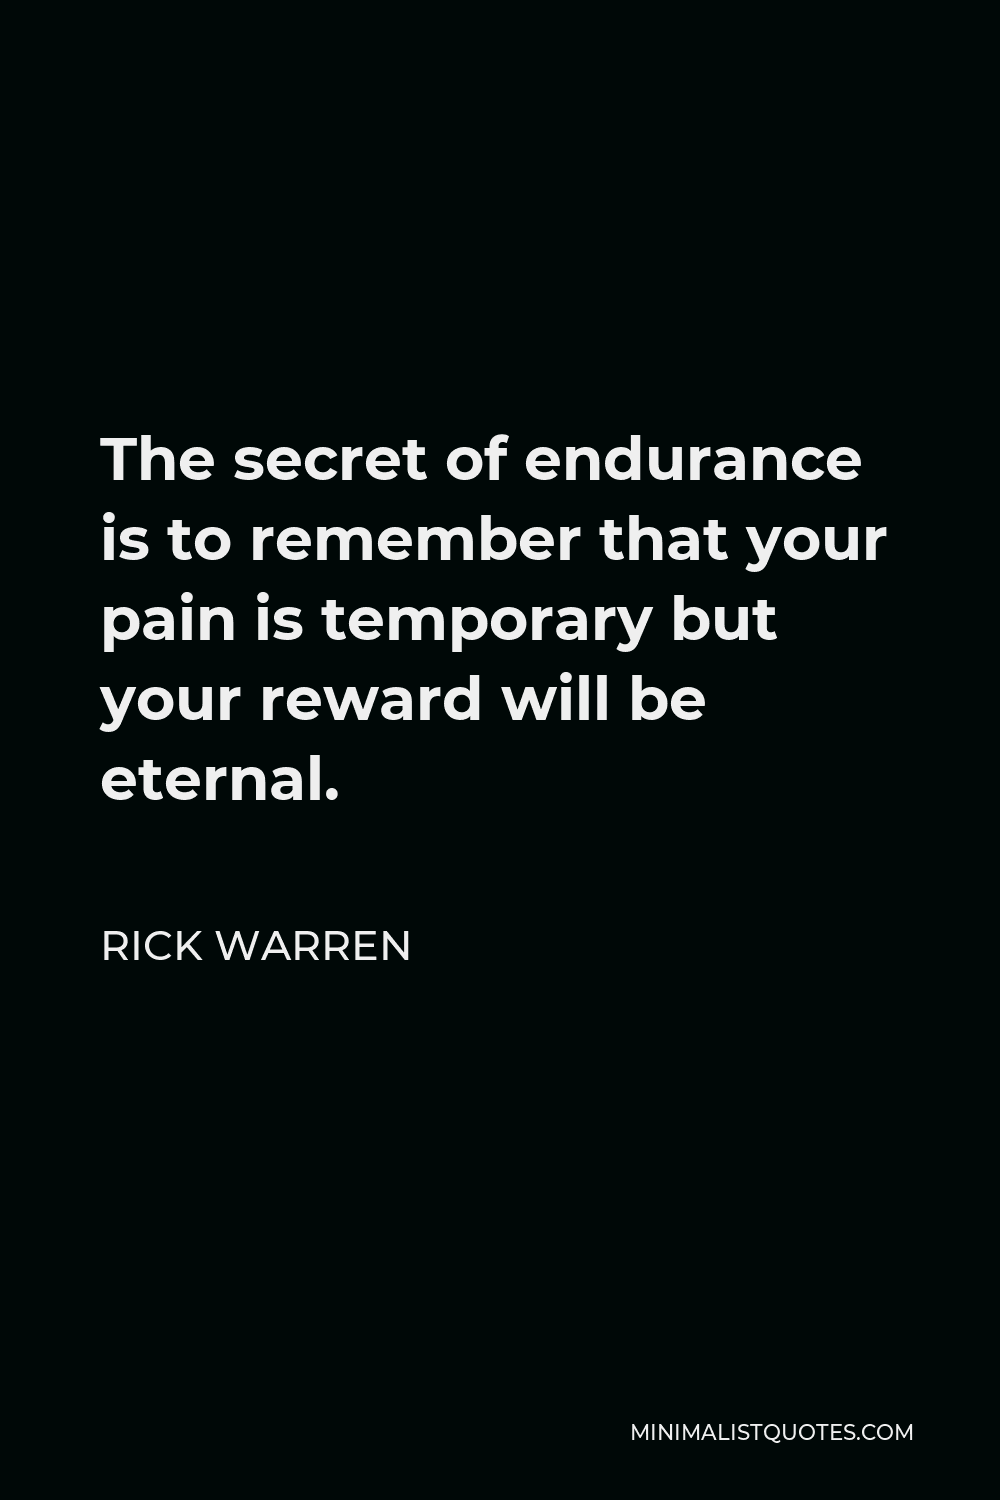 Rick Warren Quote - The secret of endurance is to remember that your pain is temporary but your reward will be eternal.